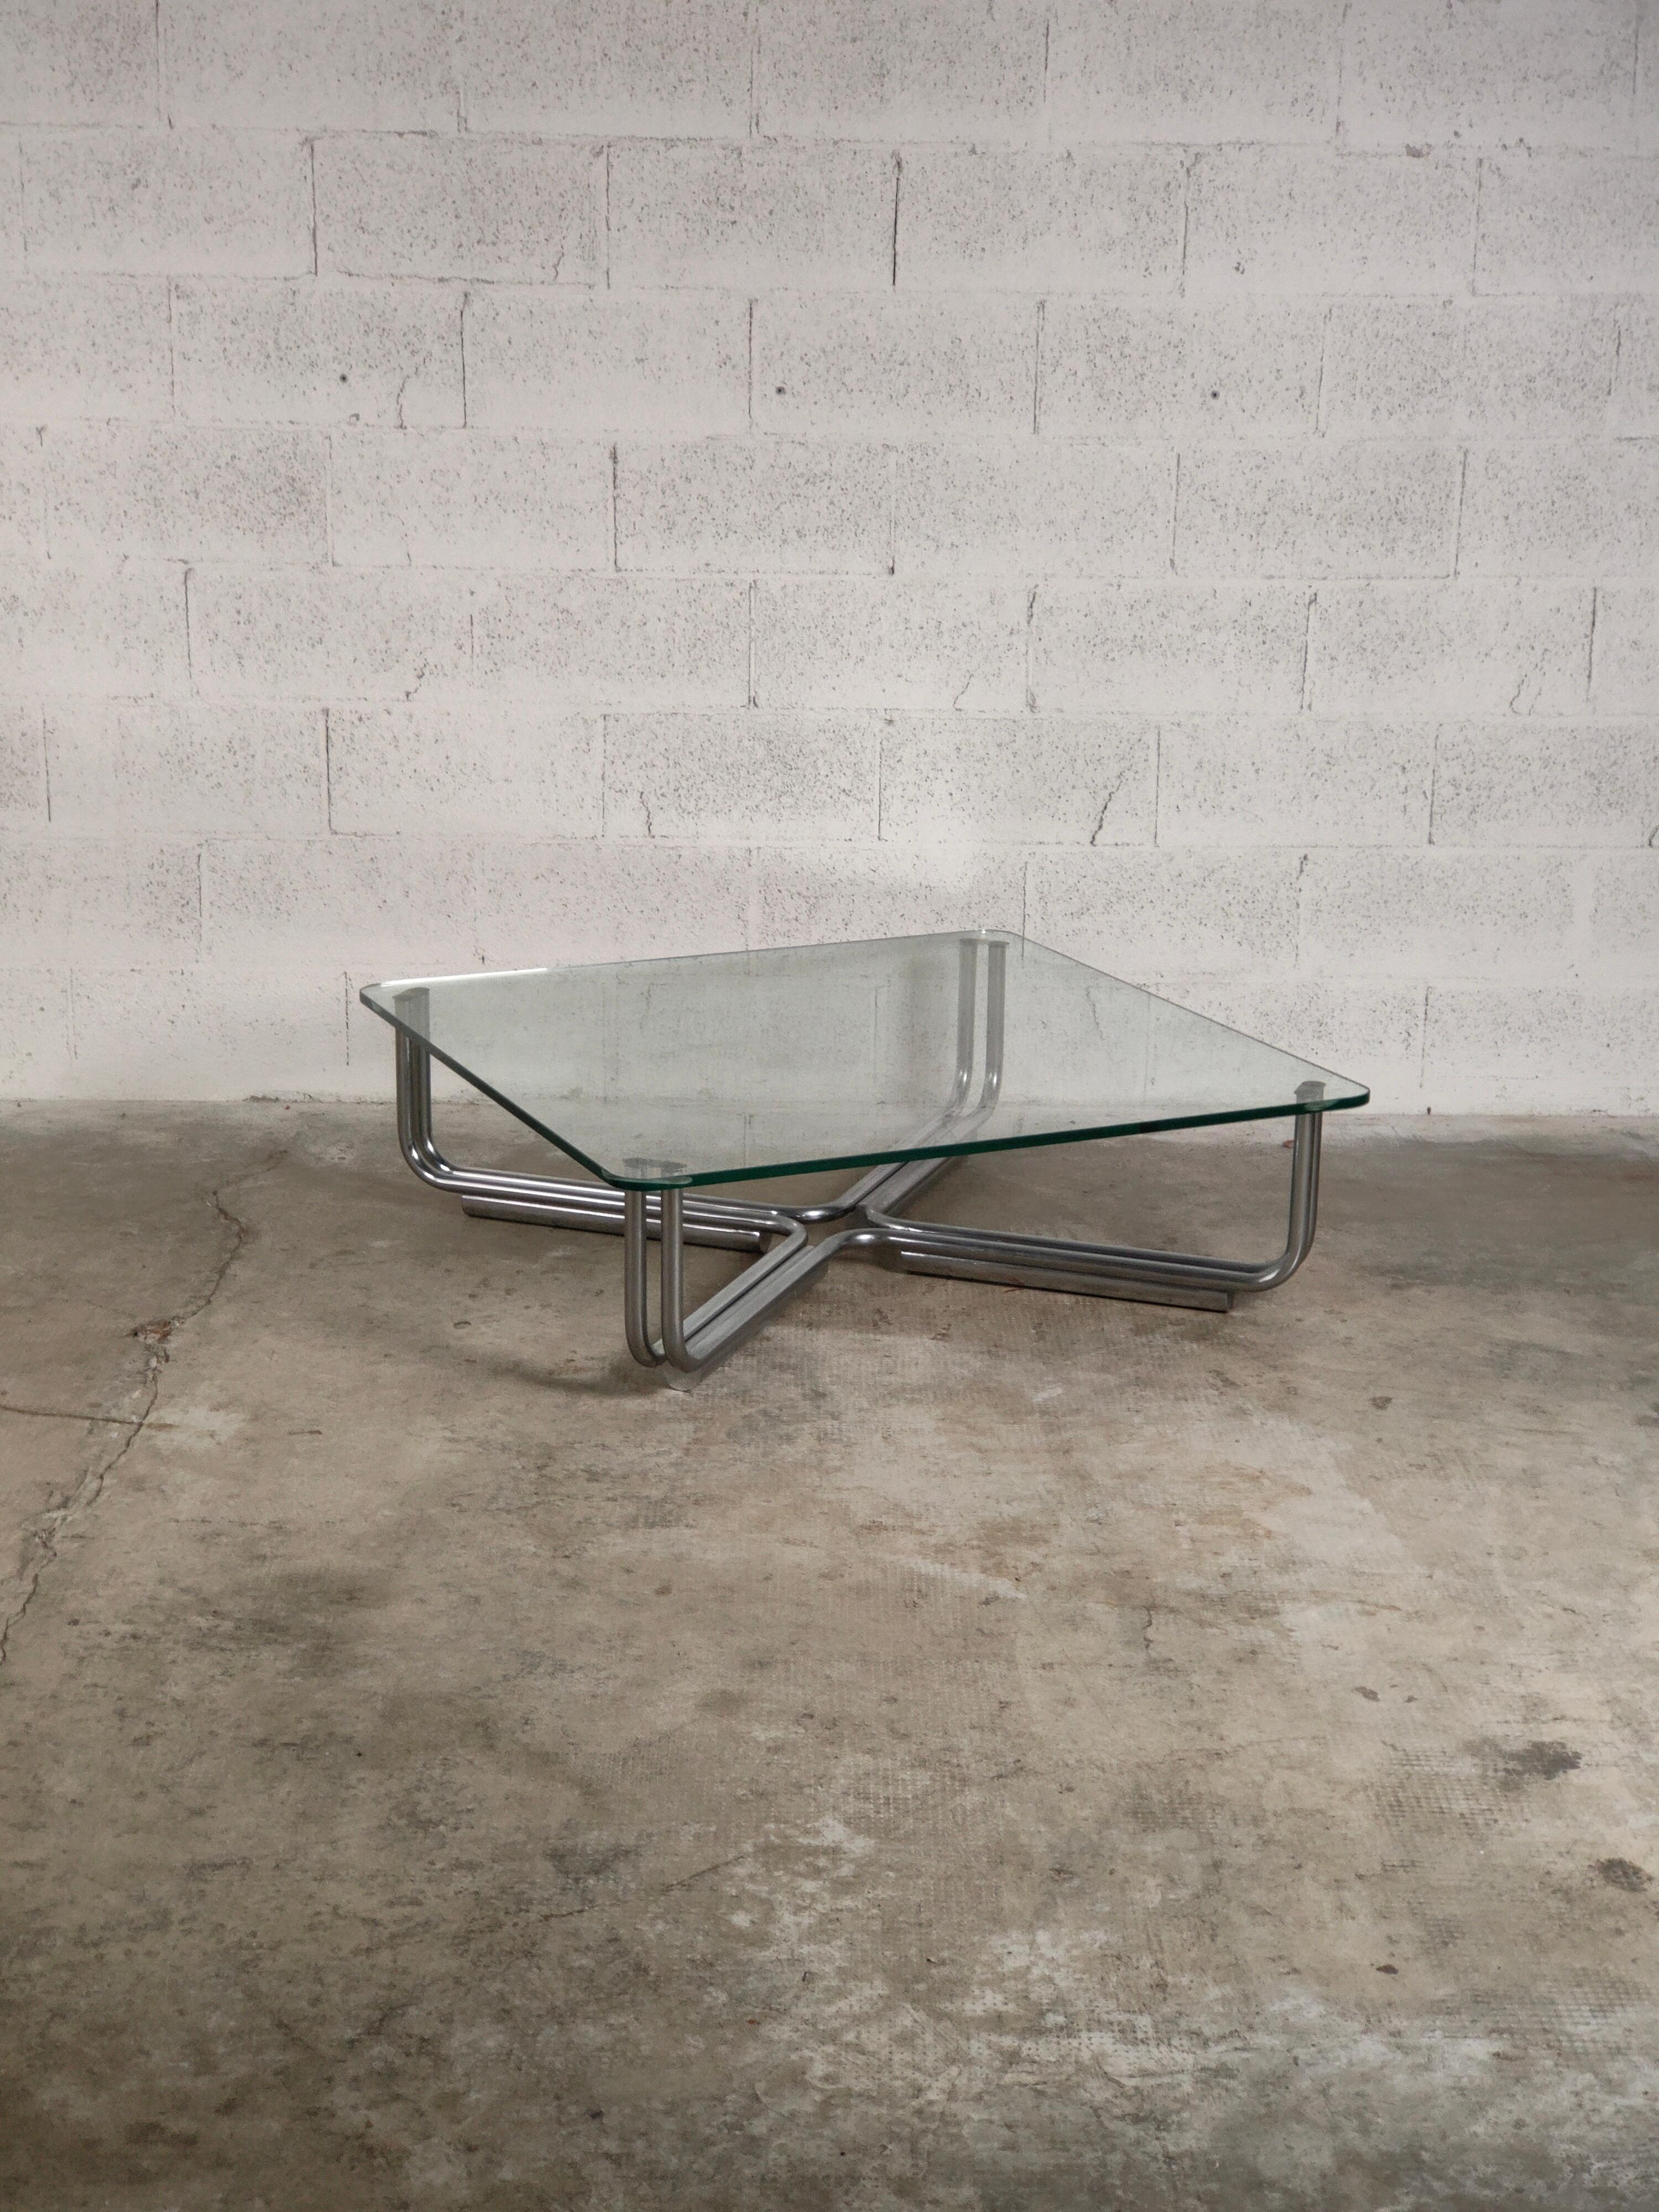 Chromed steel and glass coffee table 784 model by Gianfranco Frattini for Cassina 70s.

Born in Padua in 1926, Gianfranco Frattini graduated in Architecture at the Milan Polytechnic in 1953, where he lived and worked until his death. His